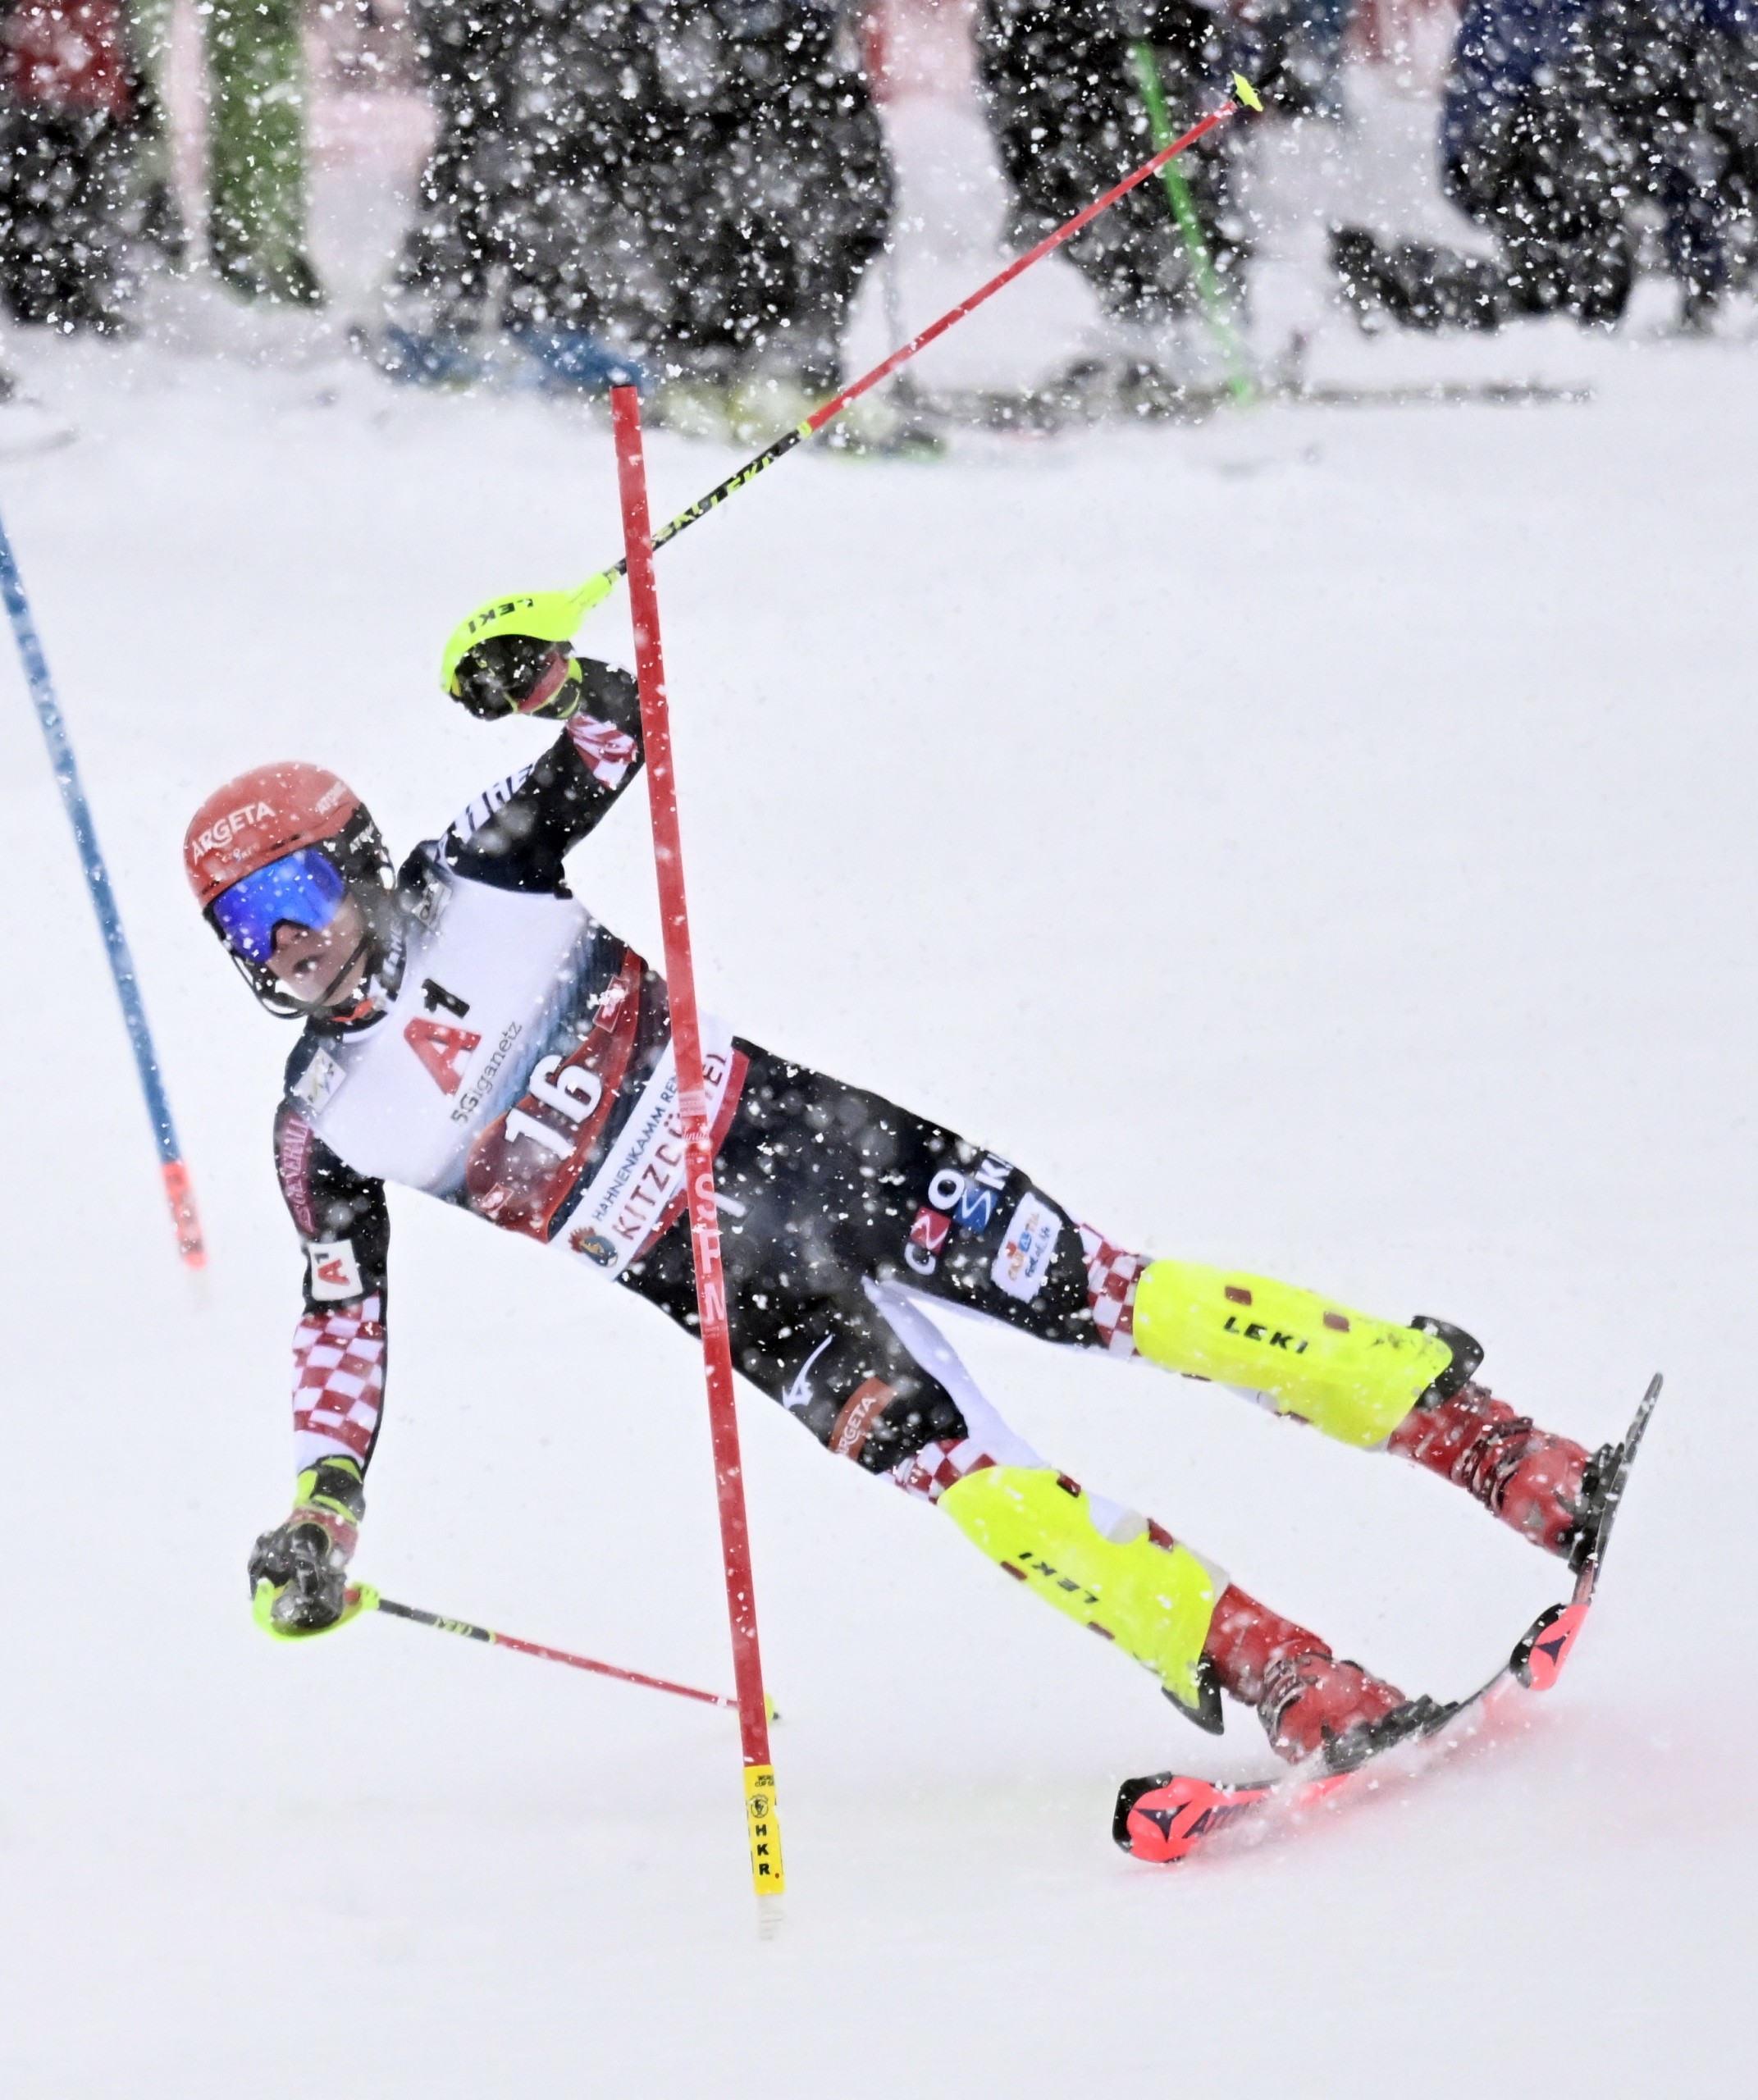 epa09701559 Filip Zubcic of Croatia in action during the first run of the men's Slalom race of the FIS Alpine Skiing World Cup event in Kitzbuehel, Austria, 22 January 2022.  EPA/CHRISTIAN BRUNA